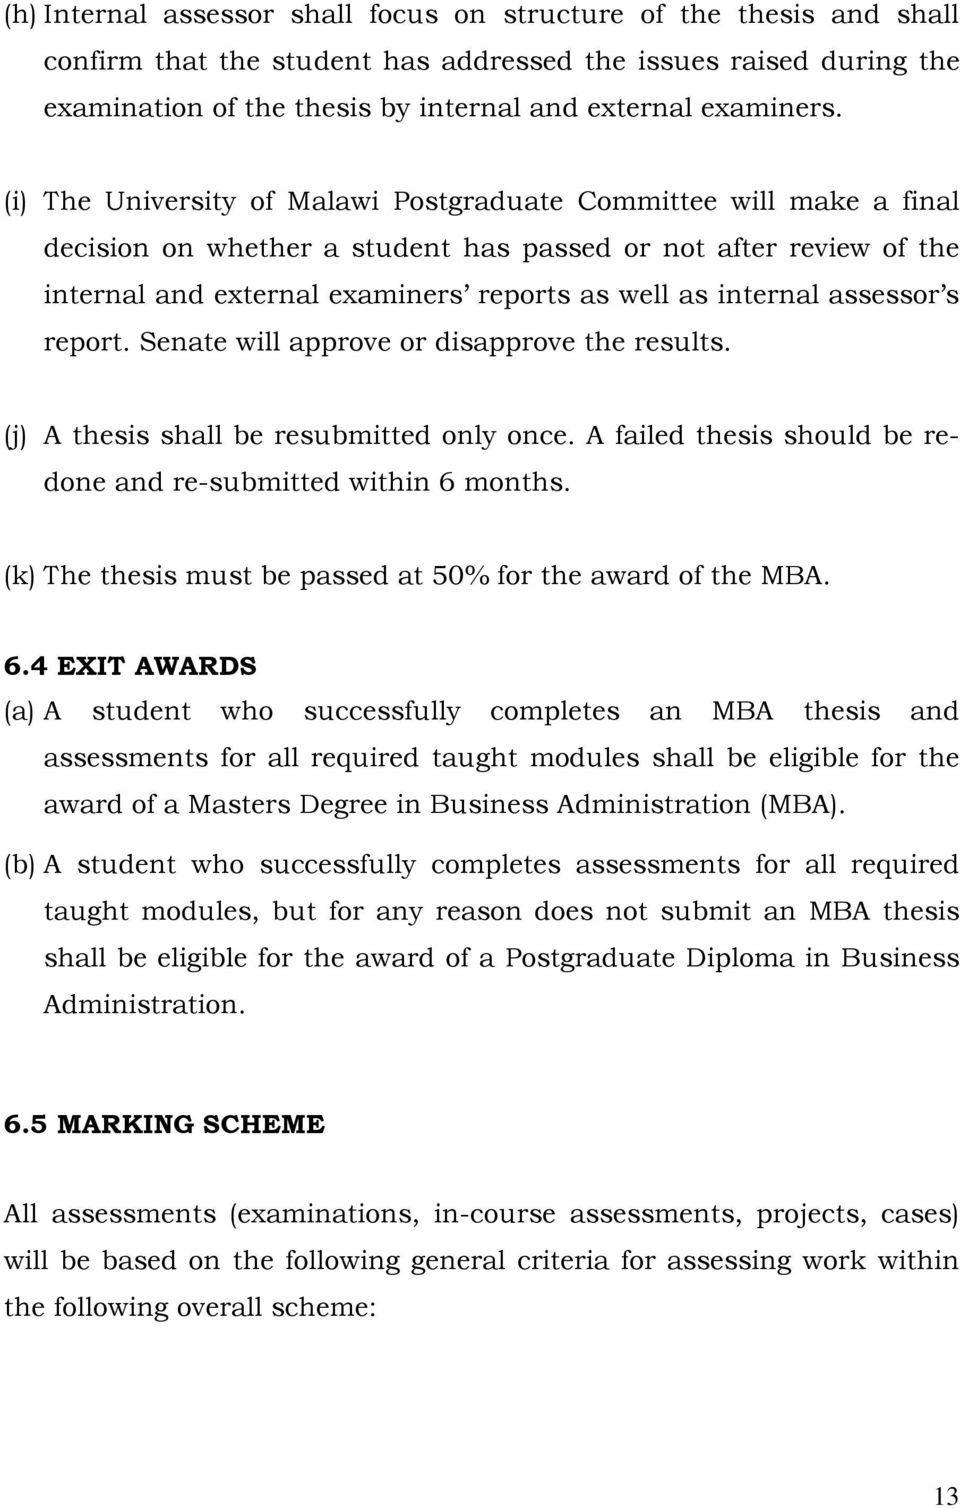 assessor s report. Senate will approve or disapprove the results. (j) A thesis shall be resubmitted only once. A failed thesis should be redone and re-submitted within 6 months.